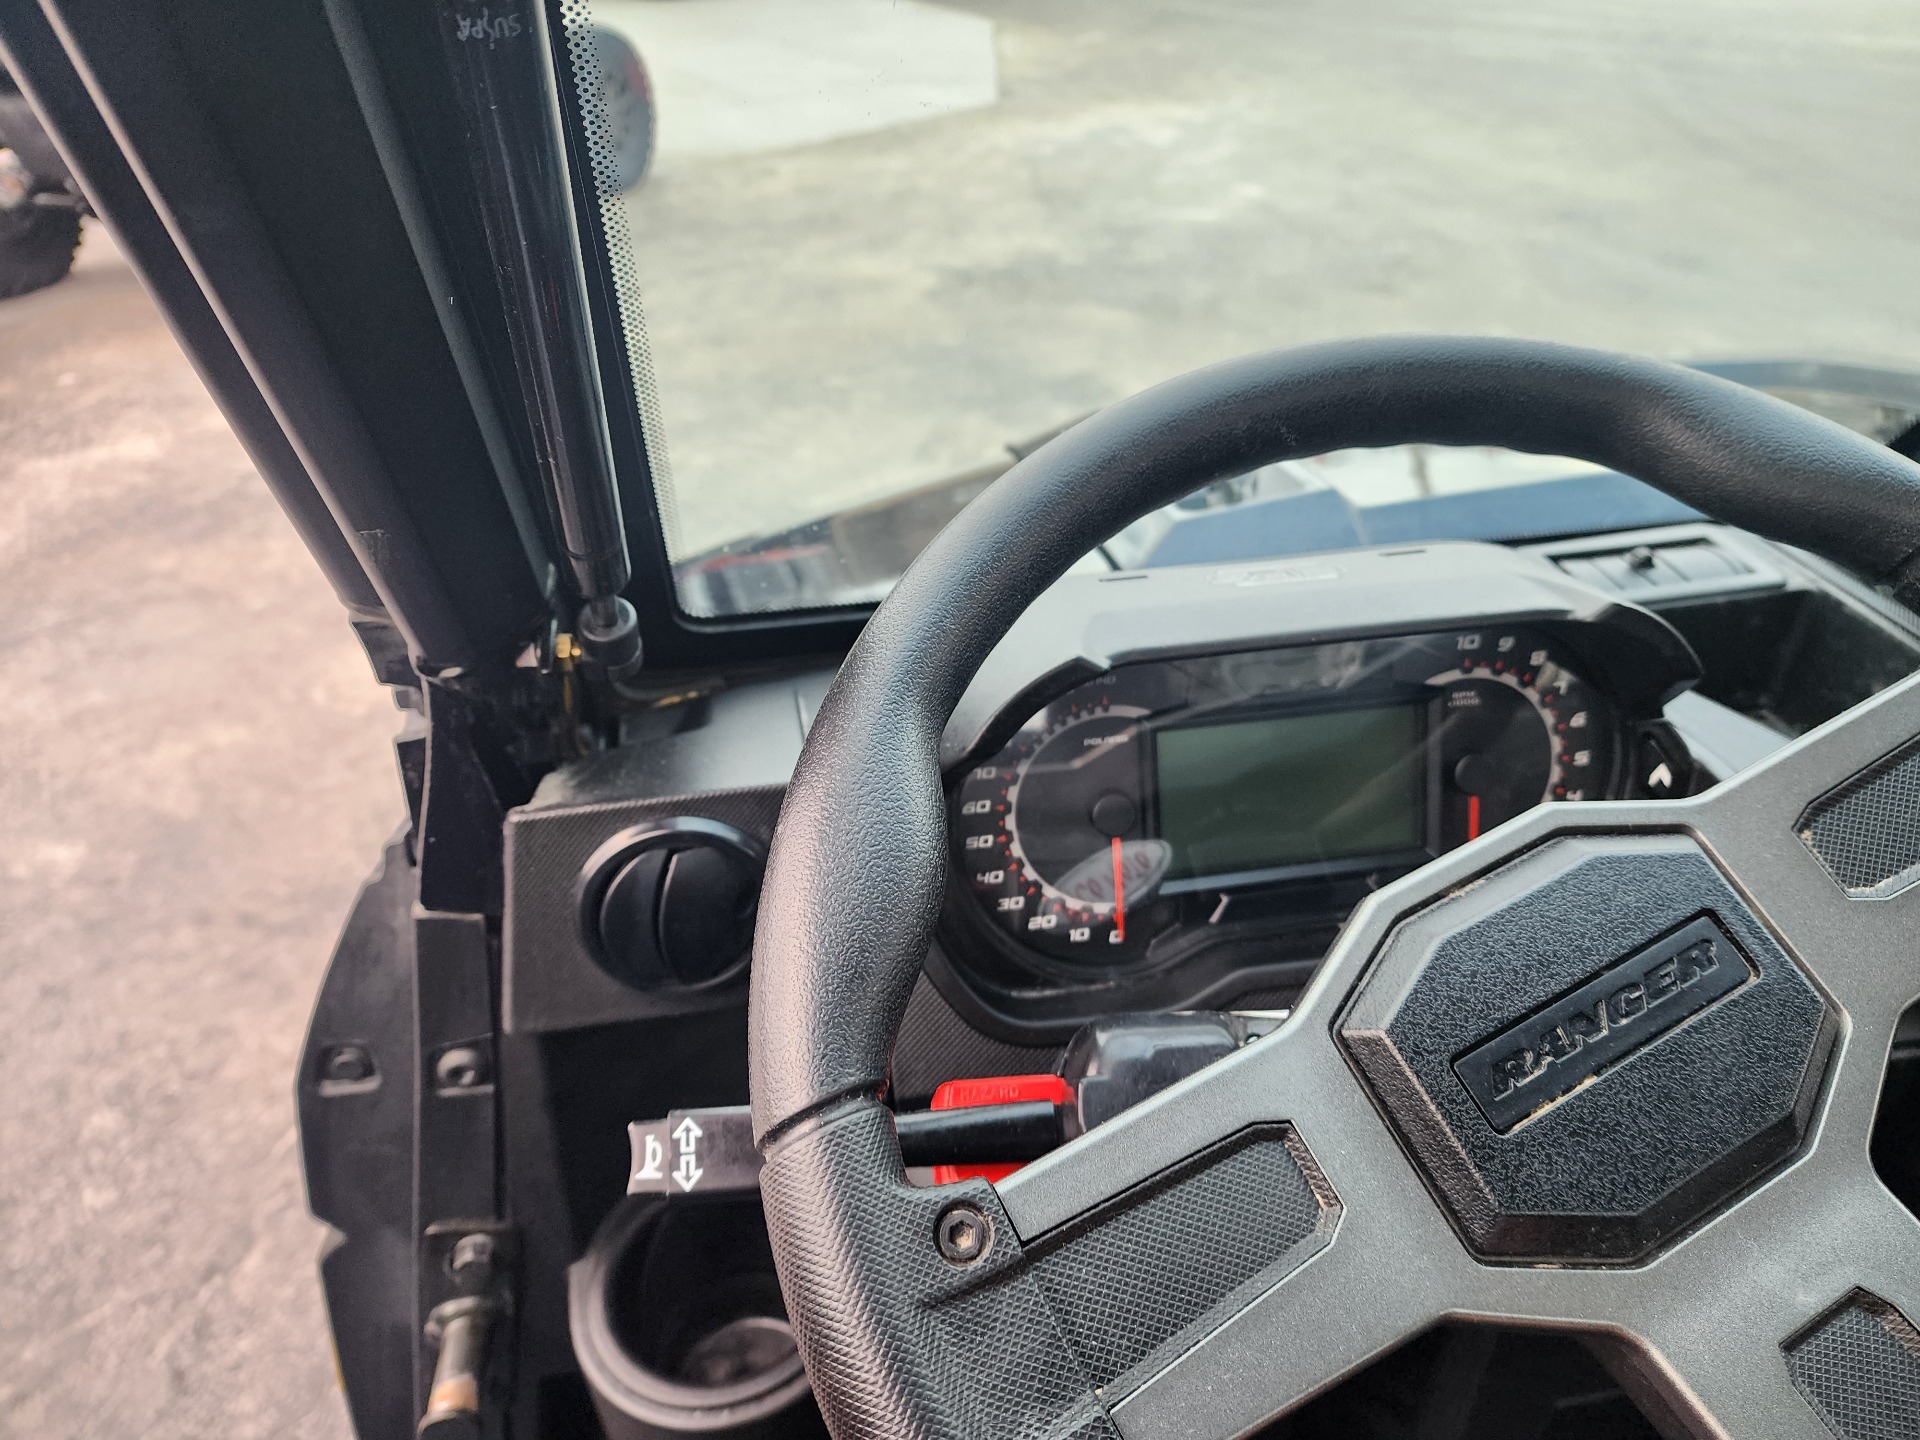 2023 Polaris Ranger XP 1000 Northstar Edition Ultimate - Ride Command Package in Fond Du Lac, Wisconsin - Photo 3